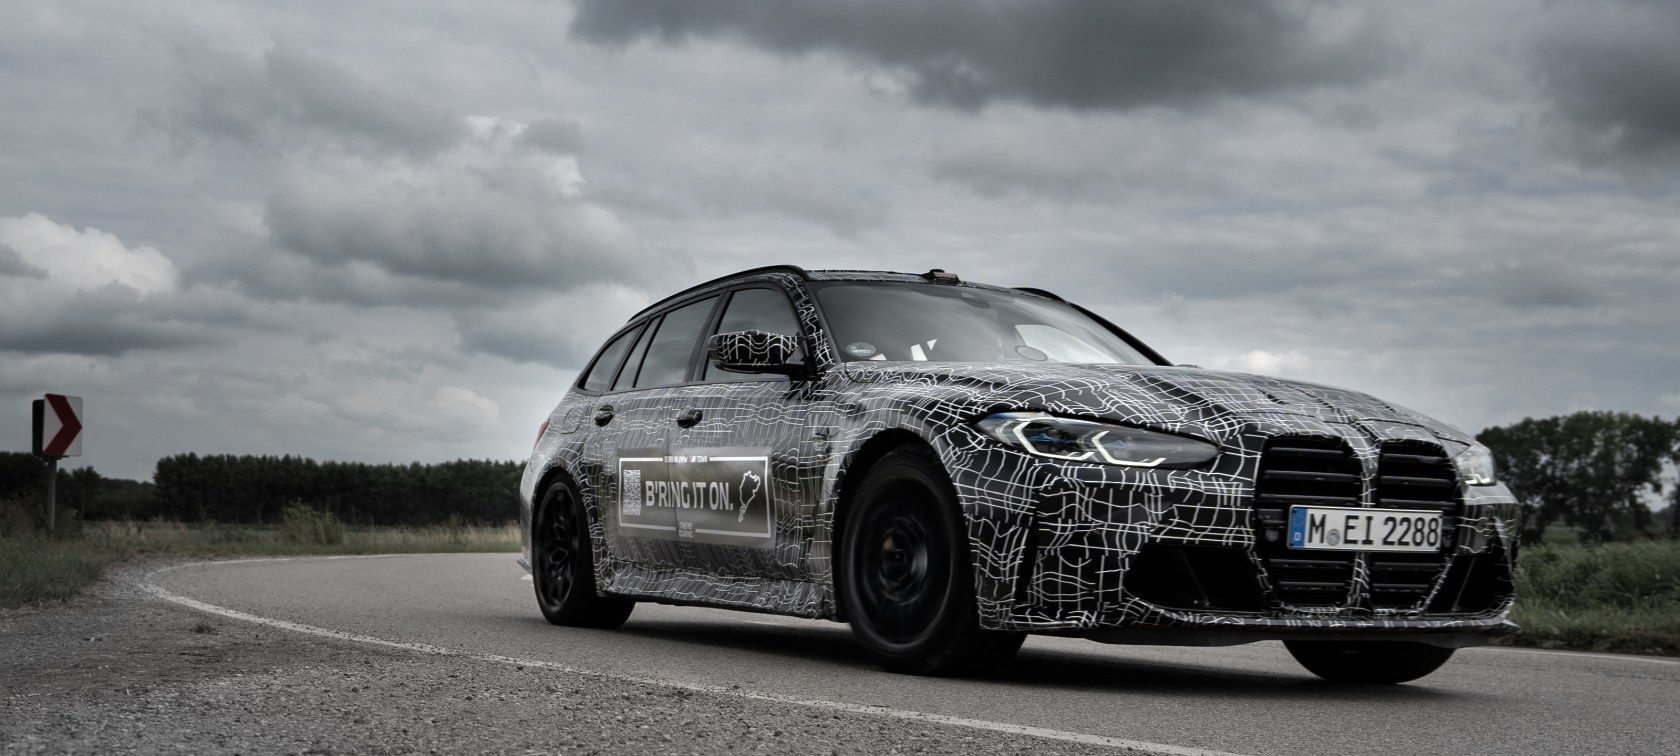 A BMW M3 Touring shows off the new BMW Kidney Grille while wrapped in camo, shot from the front 3/4